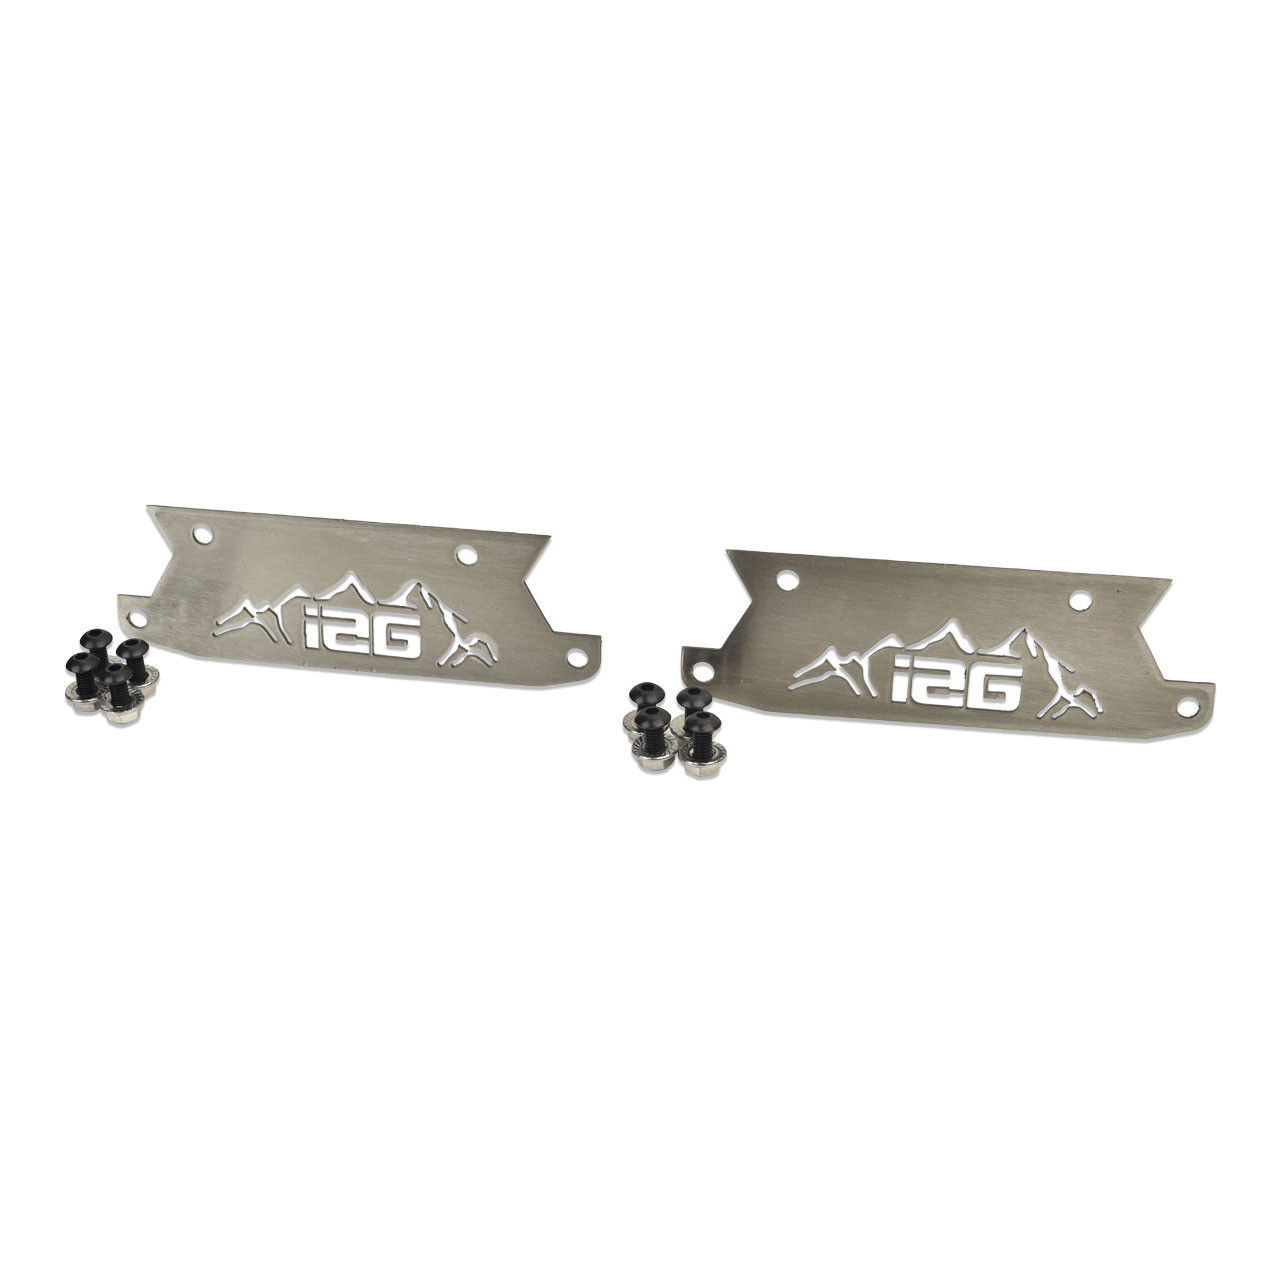 IAG Off-Road Color Logo Plate - Stainless Finish